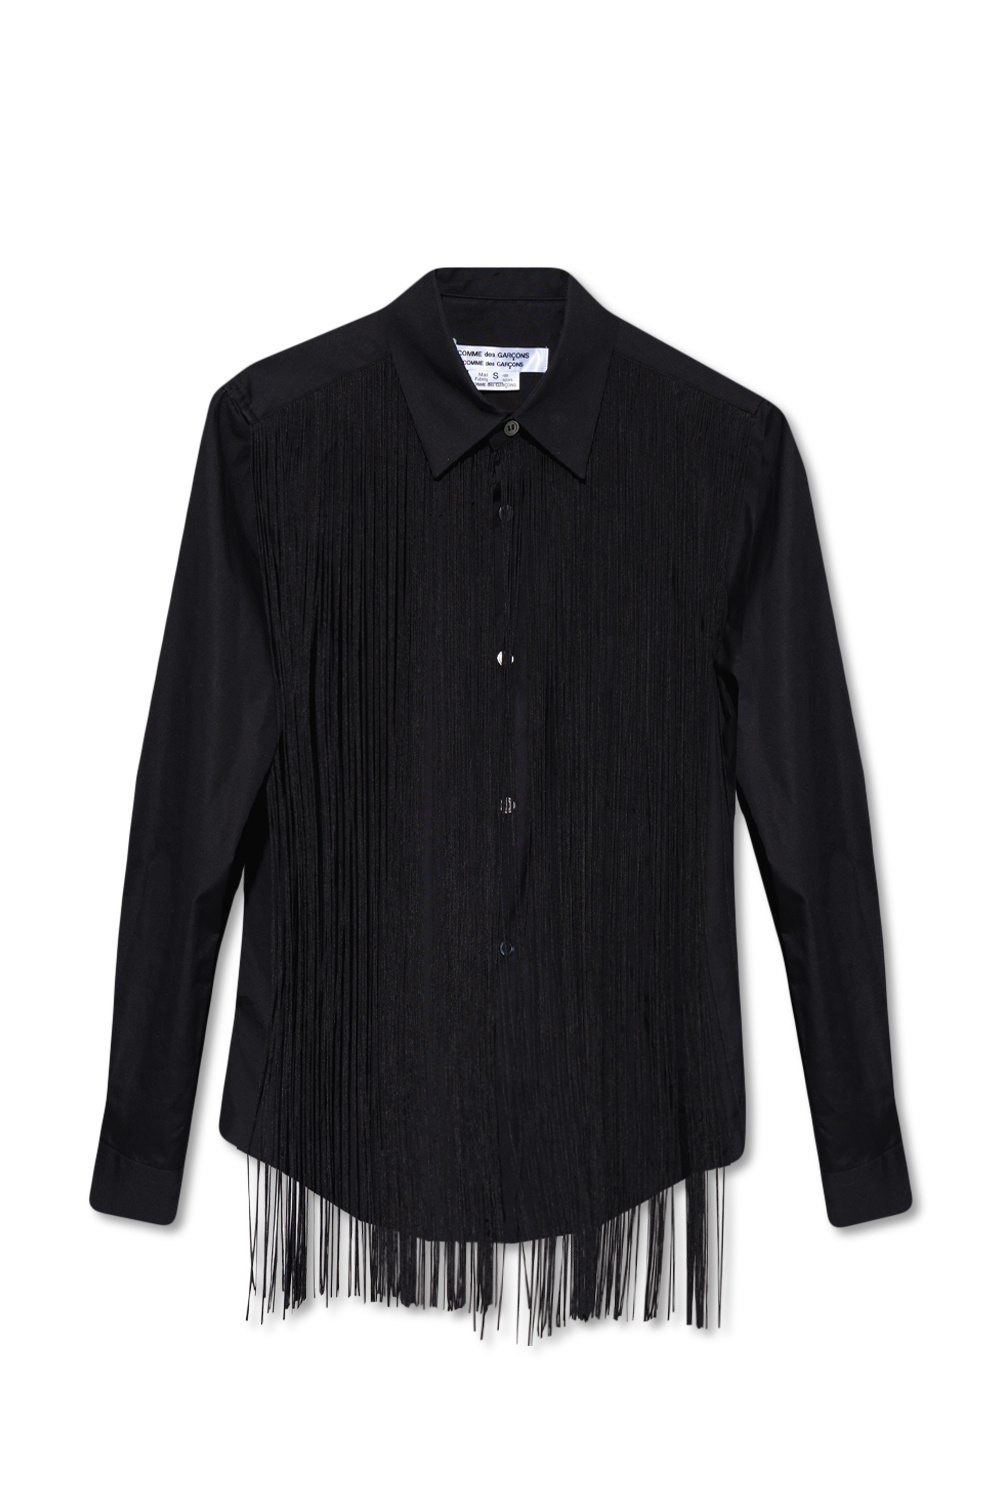 CDG by Comme des Garcons Fringed shirt ...